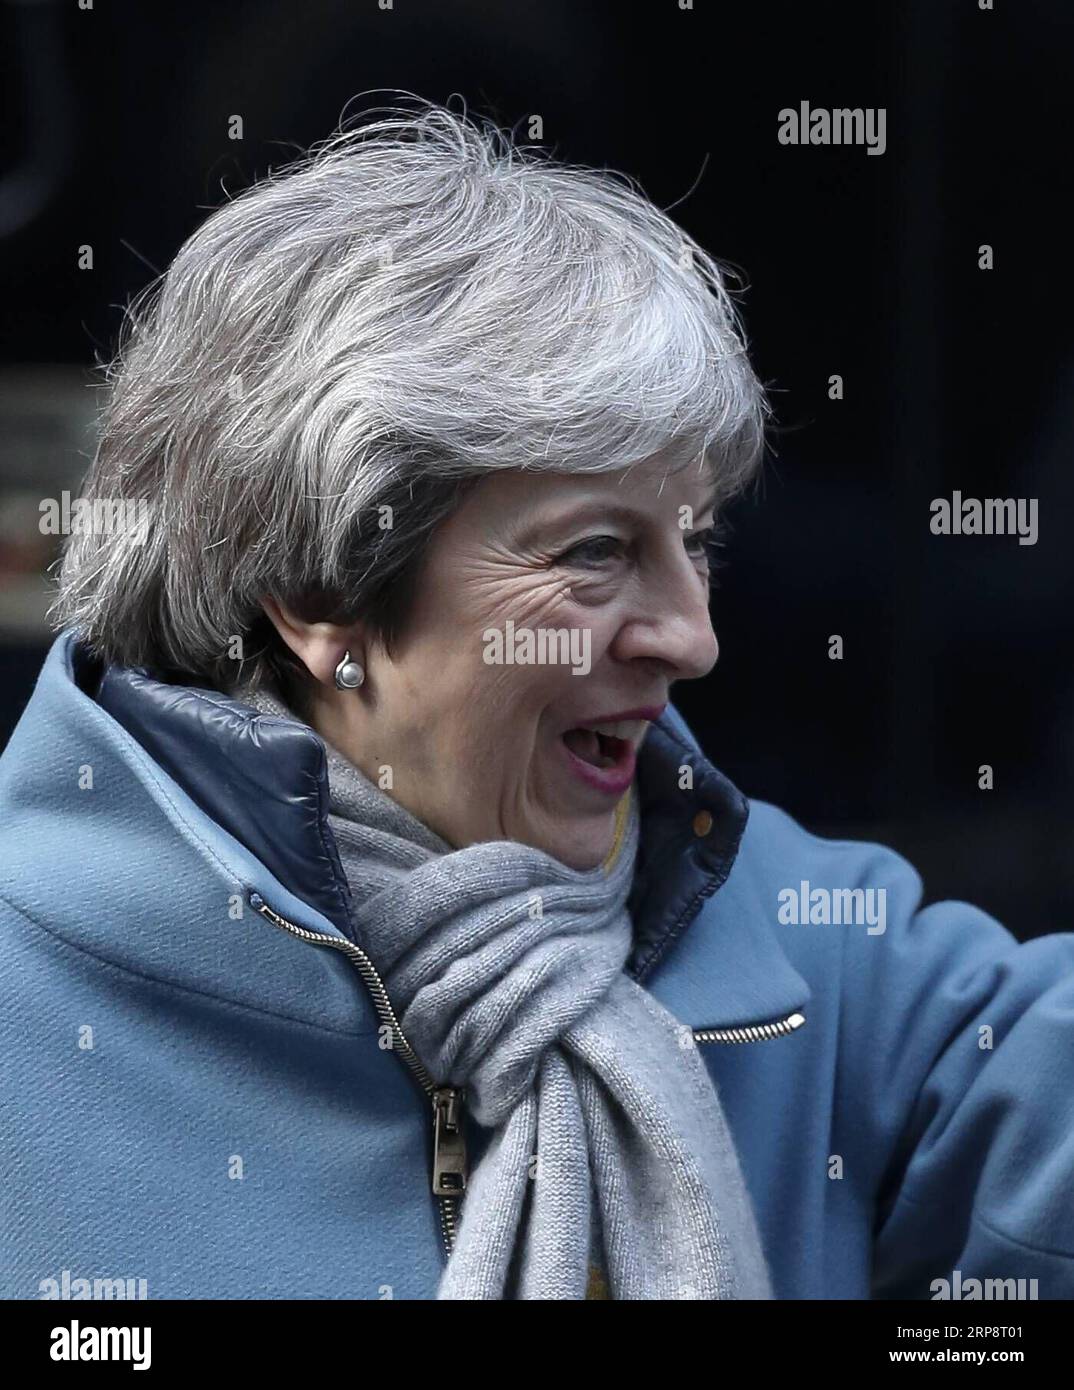 (190314) -- LONDON, March 14, 2019 (Xinhua) -- British Prime Minister Theresa May leaves 10 Downing Street for the House of Commons in London, Britain, on March 14, 2019. British MPs on Thursday voted overwhelmingly to ask the European Union (EU) for an extension to Article 50 in the trouble Brexit process. They voted in the House of Commons by 412 to 202, a majority of 210, to request the EU agreement for delaying the Brexit until June 30. (Xinhua/Han Yan) BRITAIN-LONDON-ARTICLE 50-EXTENSION-VOTE PUBLICATIONxNOTxINxCHN Stock Photo